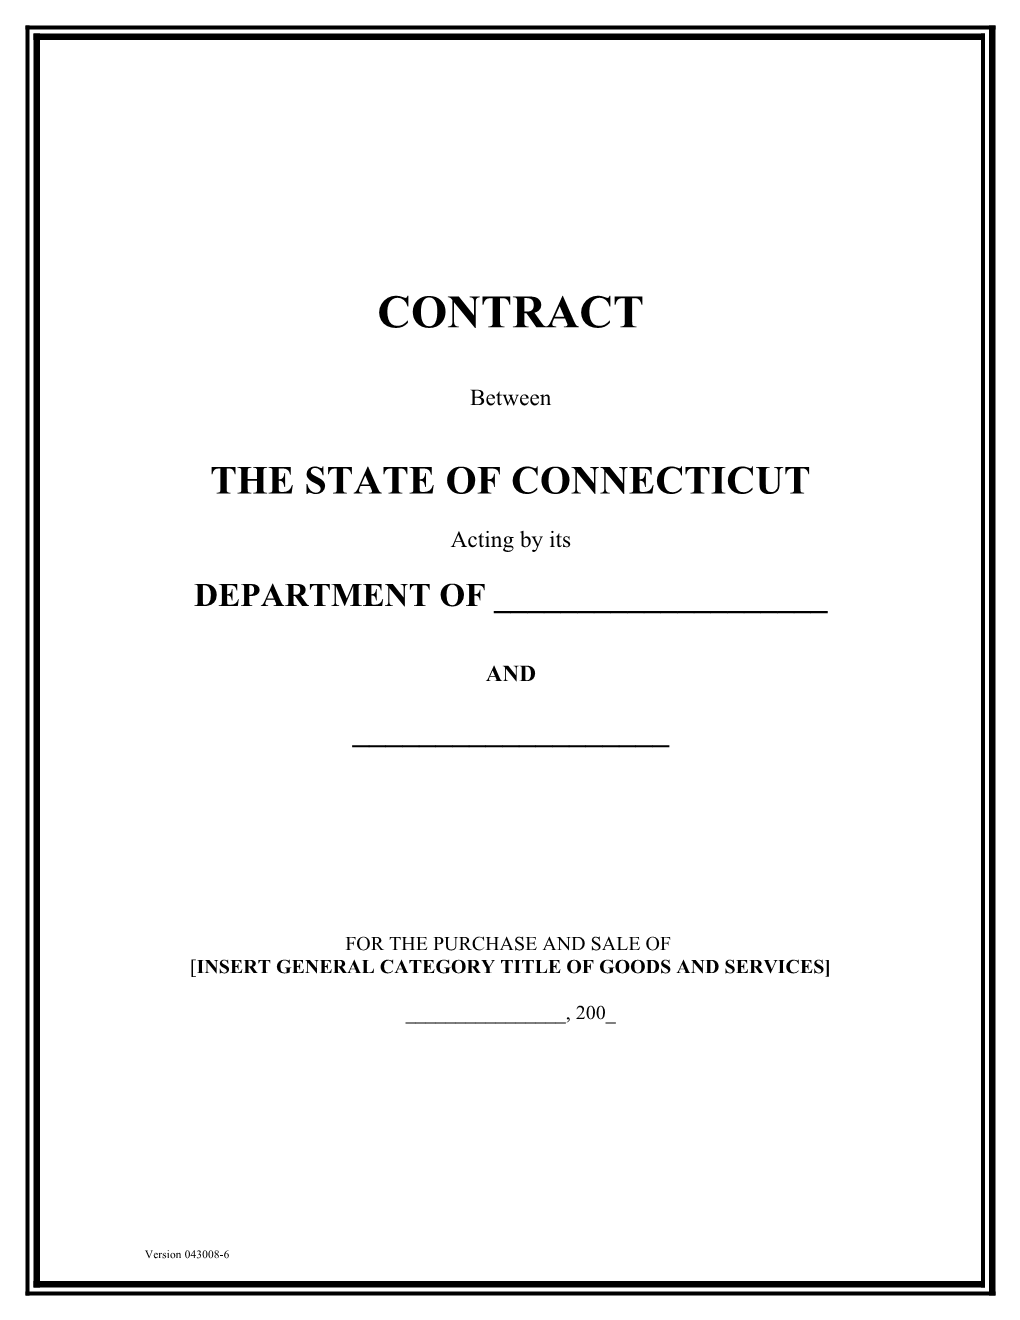 The State of Connecticut